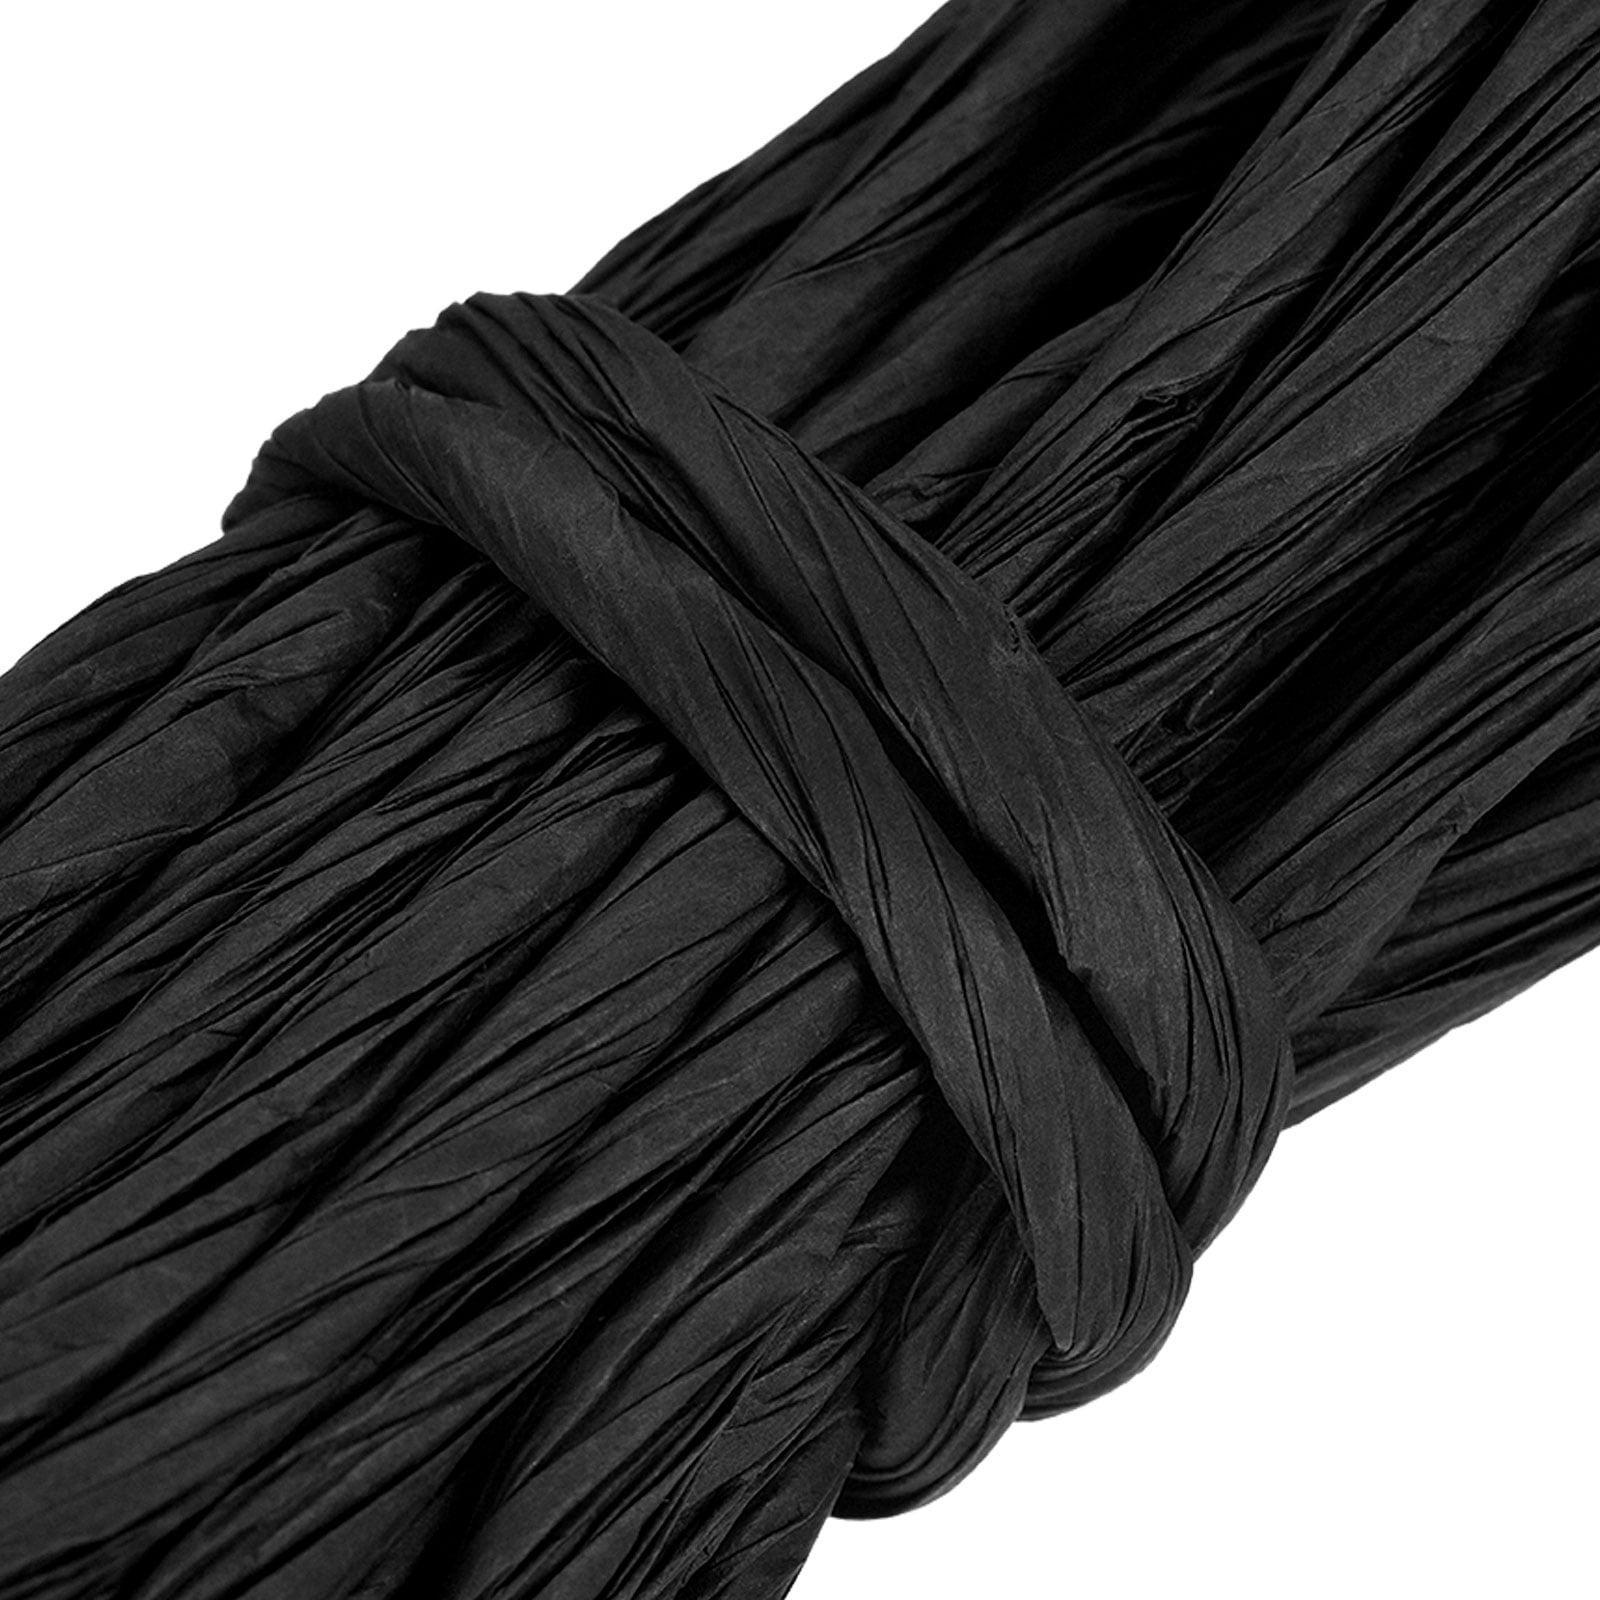 13mm Black Decorative Braided Rope 30ft, Thick Rope, Handle for Bag, Cotton  Rope, Beach Party Decor, Craft Supplies / 5yd4.6m 